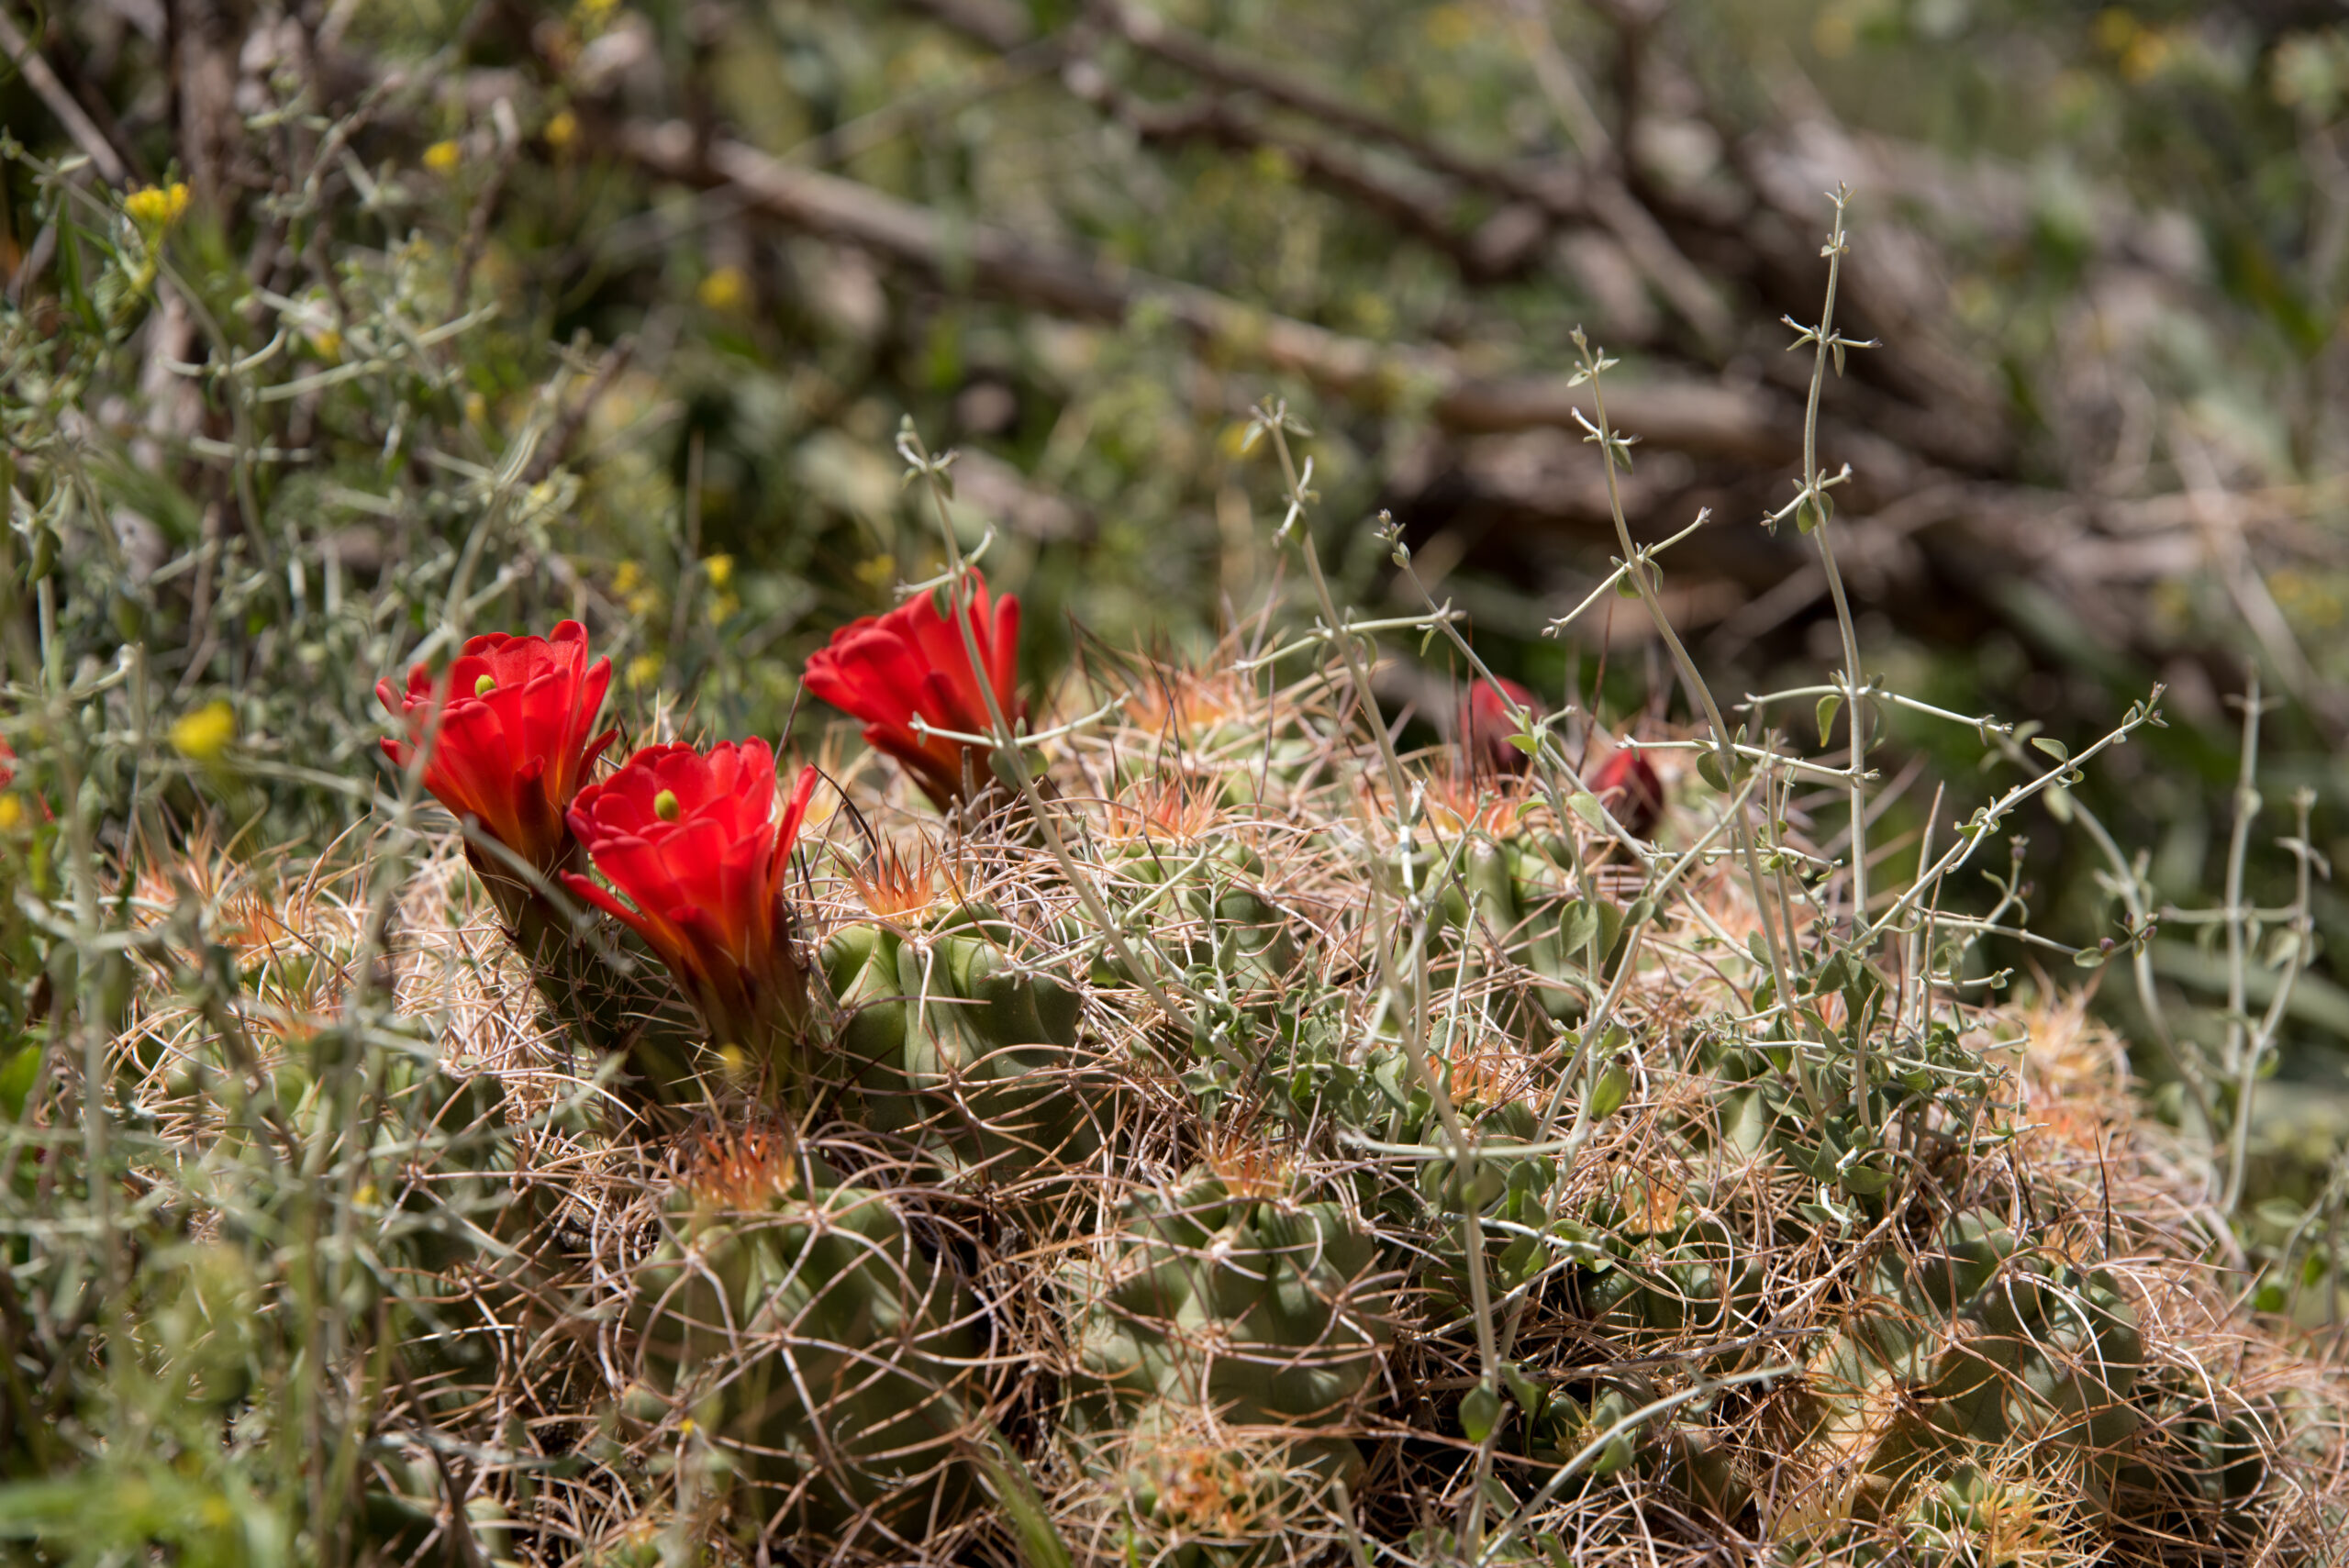 3 red flowers in a bed of cacti. There are some other bushes in the background with small, yellow flowers.